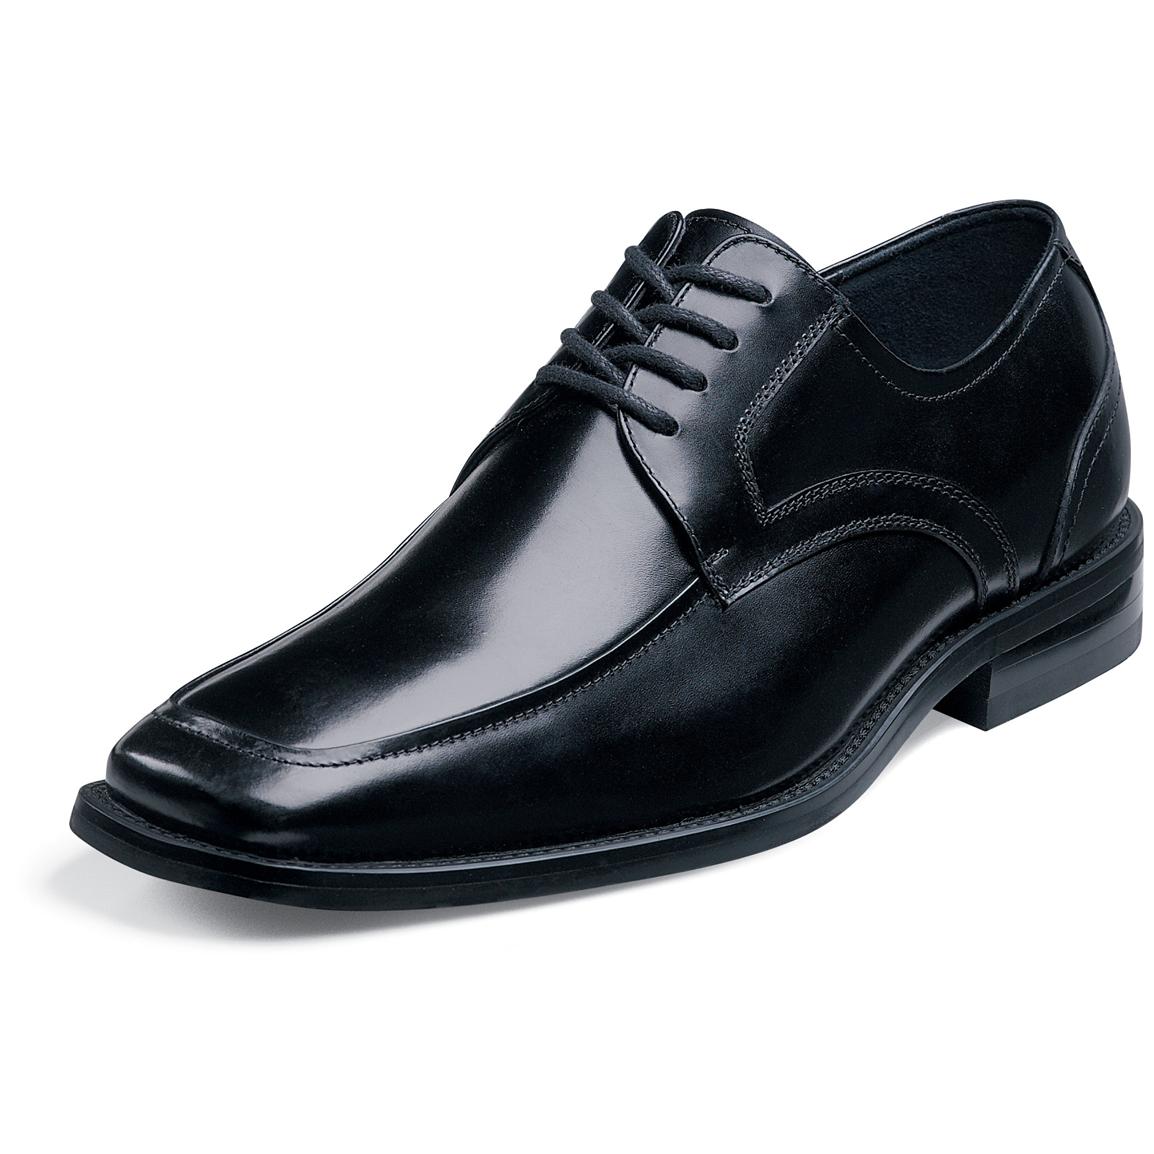 payless mens dress shoes